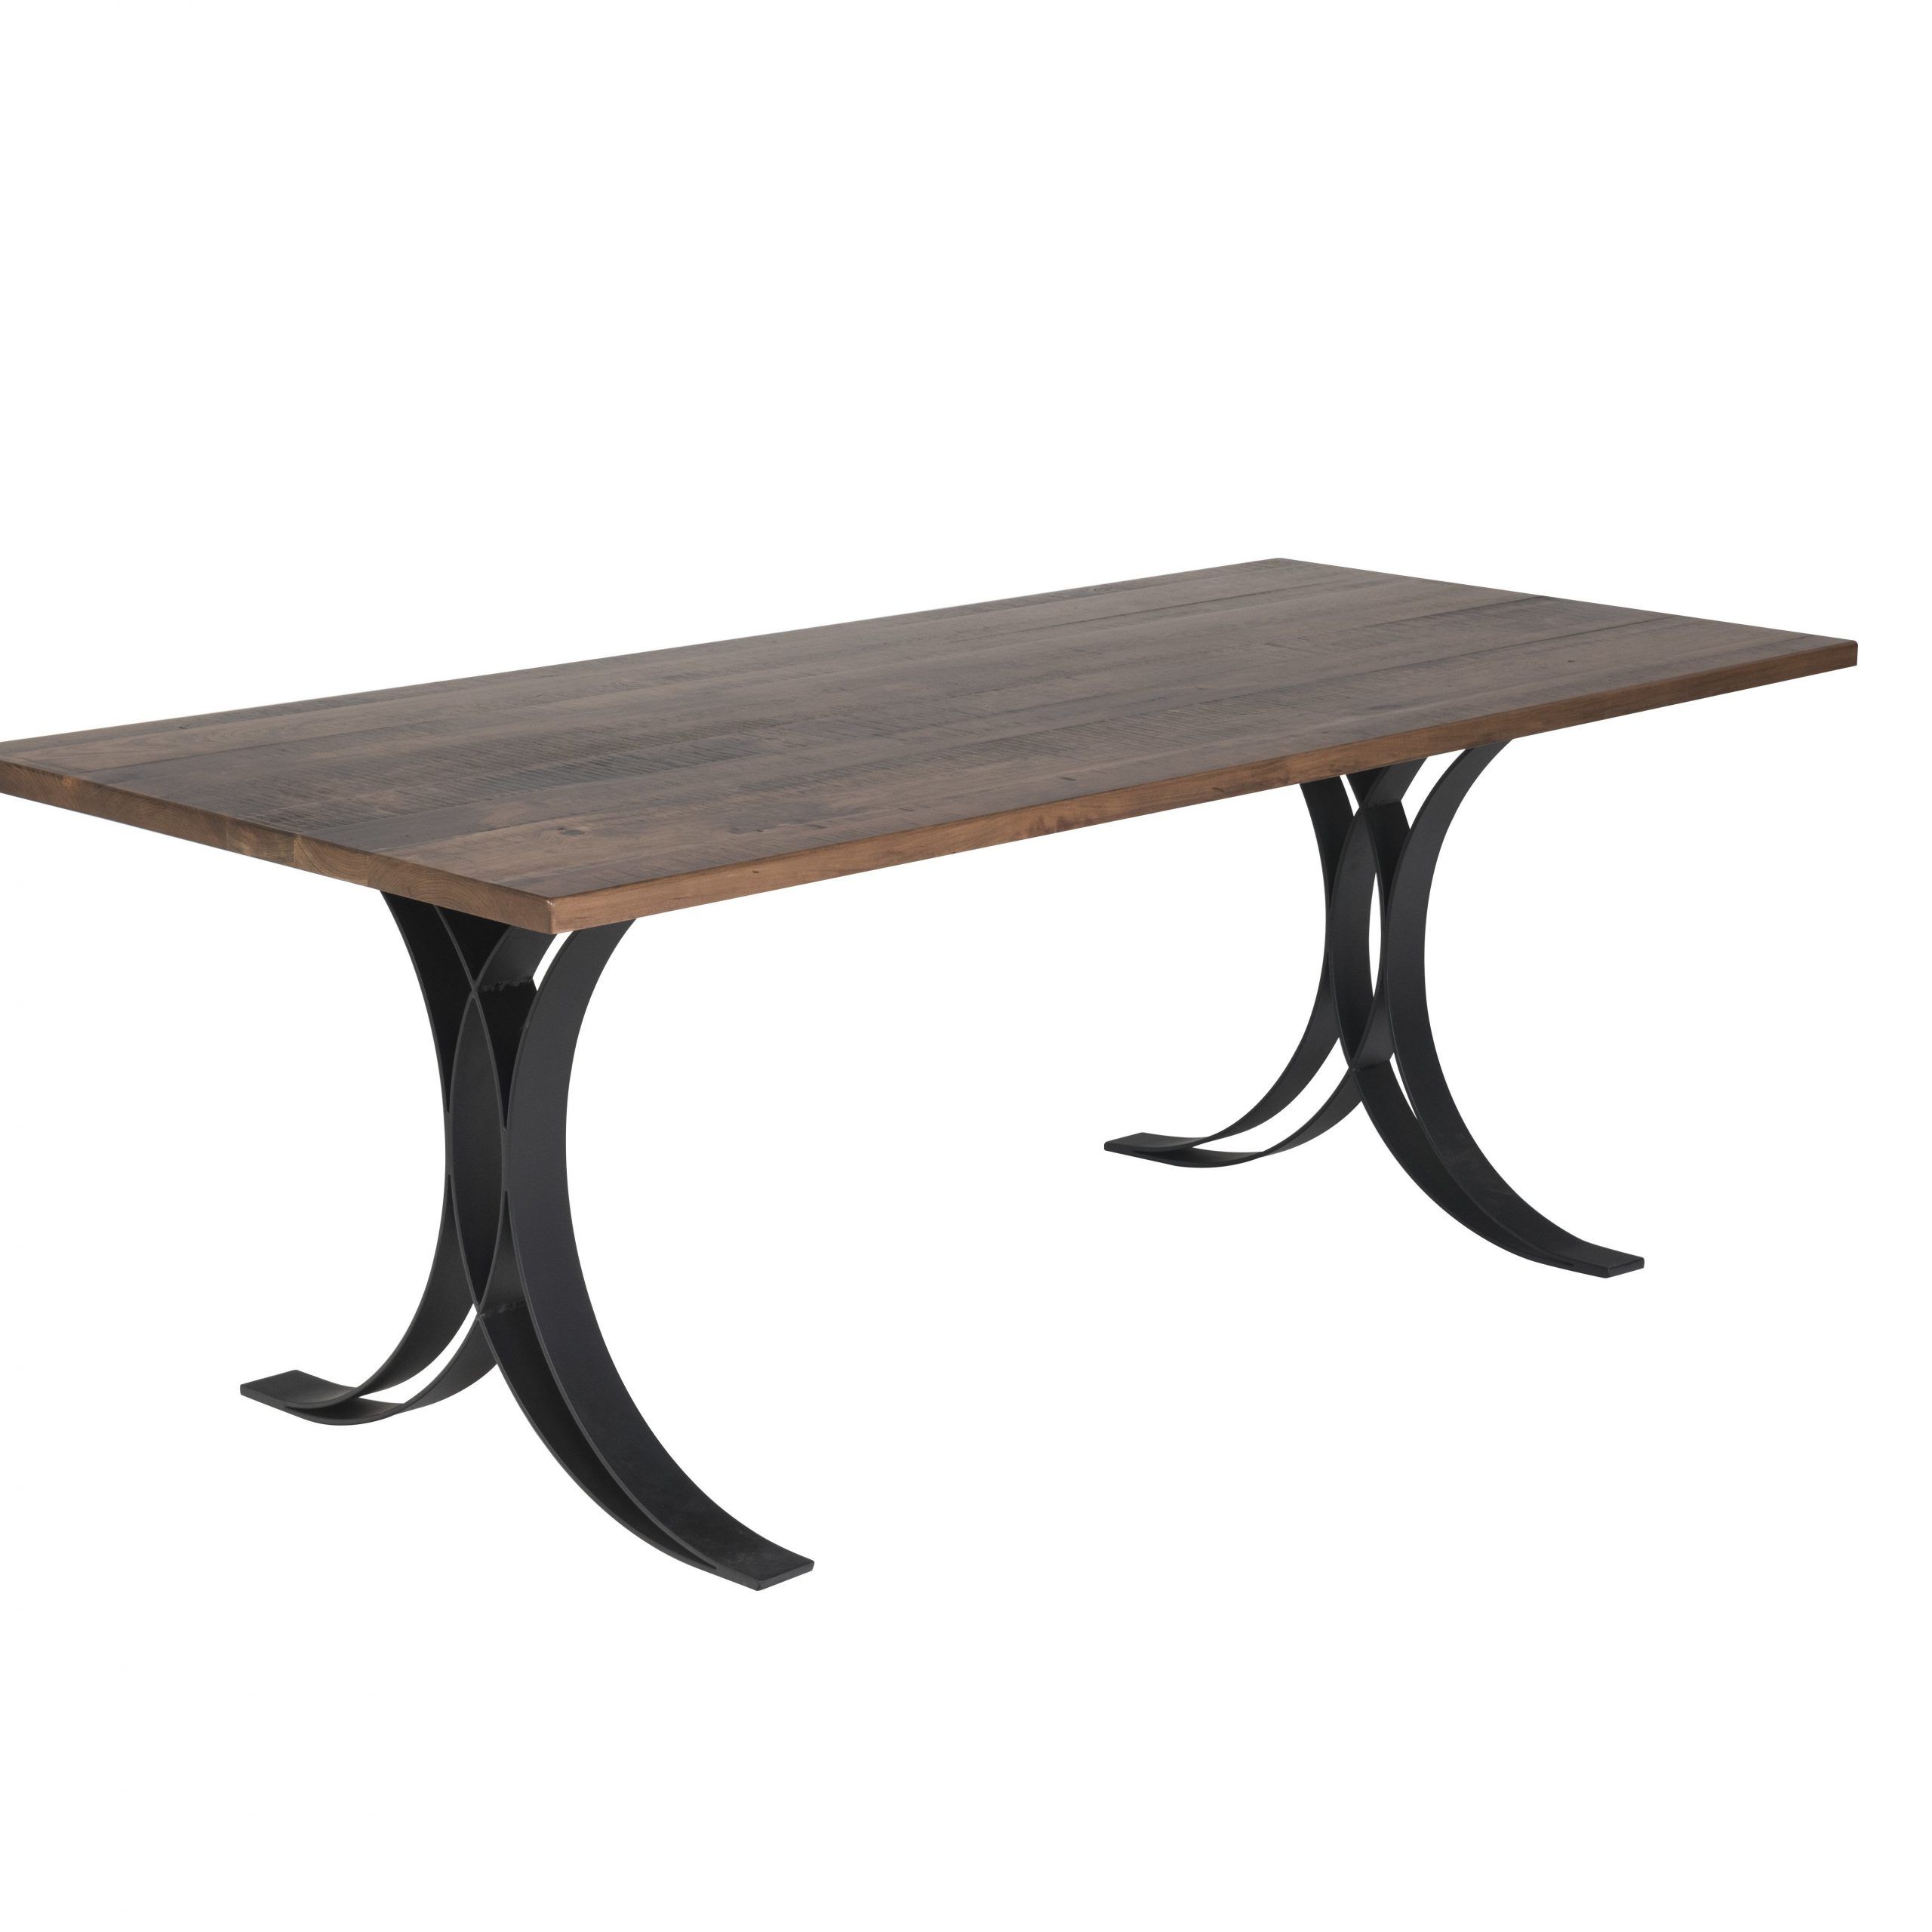 Amish Dawson Dining Table Throughout Latest Dawson Pedestal Tables (View 14 of 25)